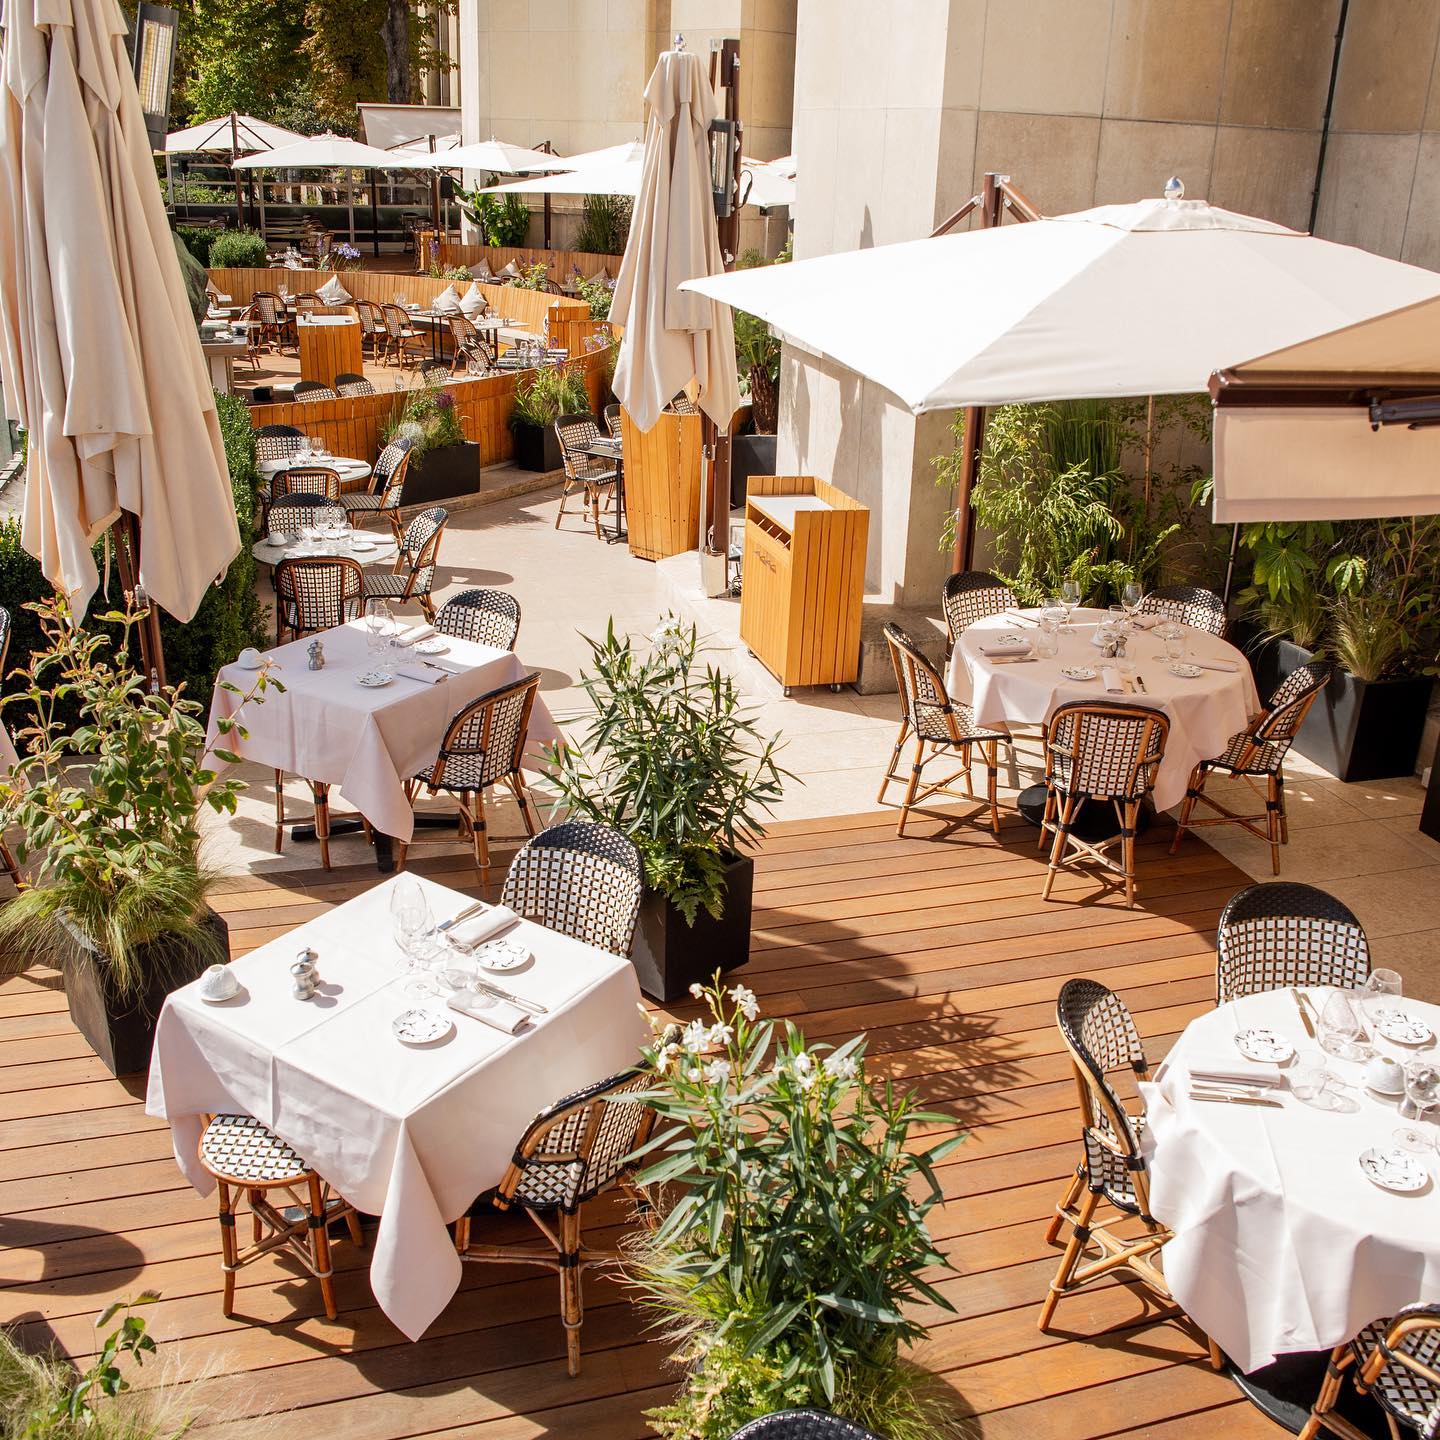 Cafe L'Homme: A hidden culinary gem in the heart of Paris